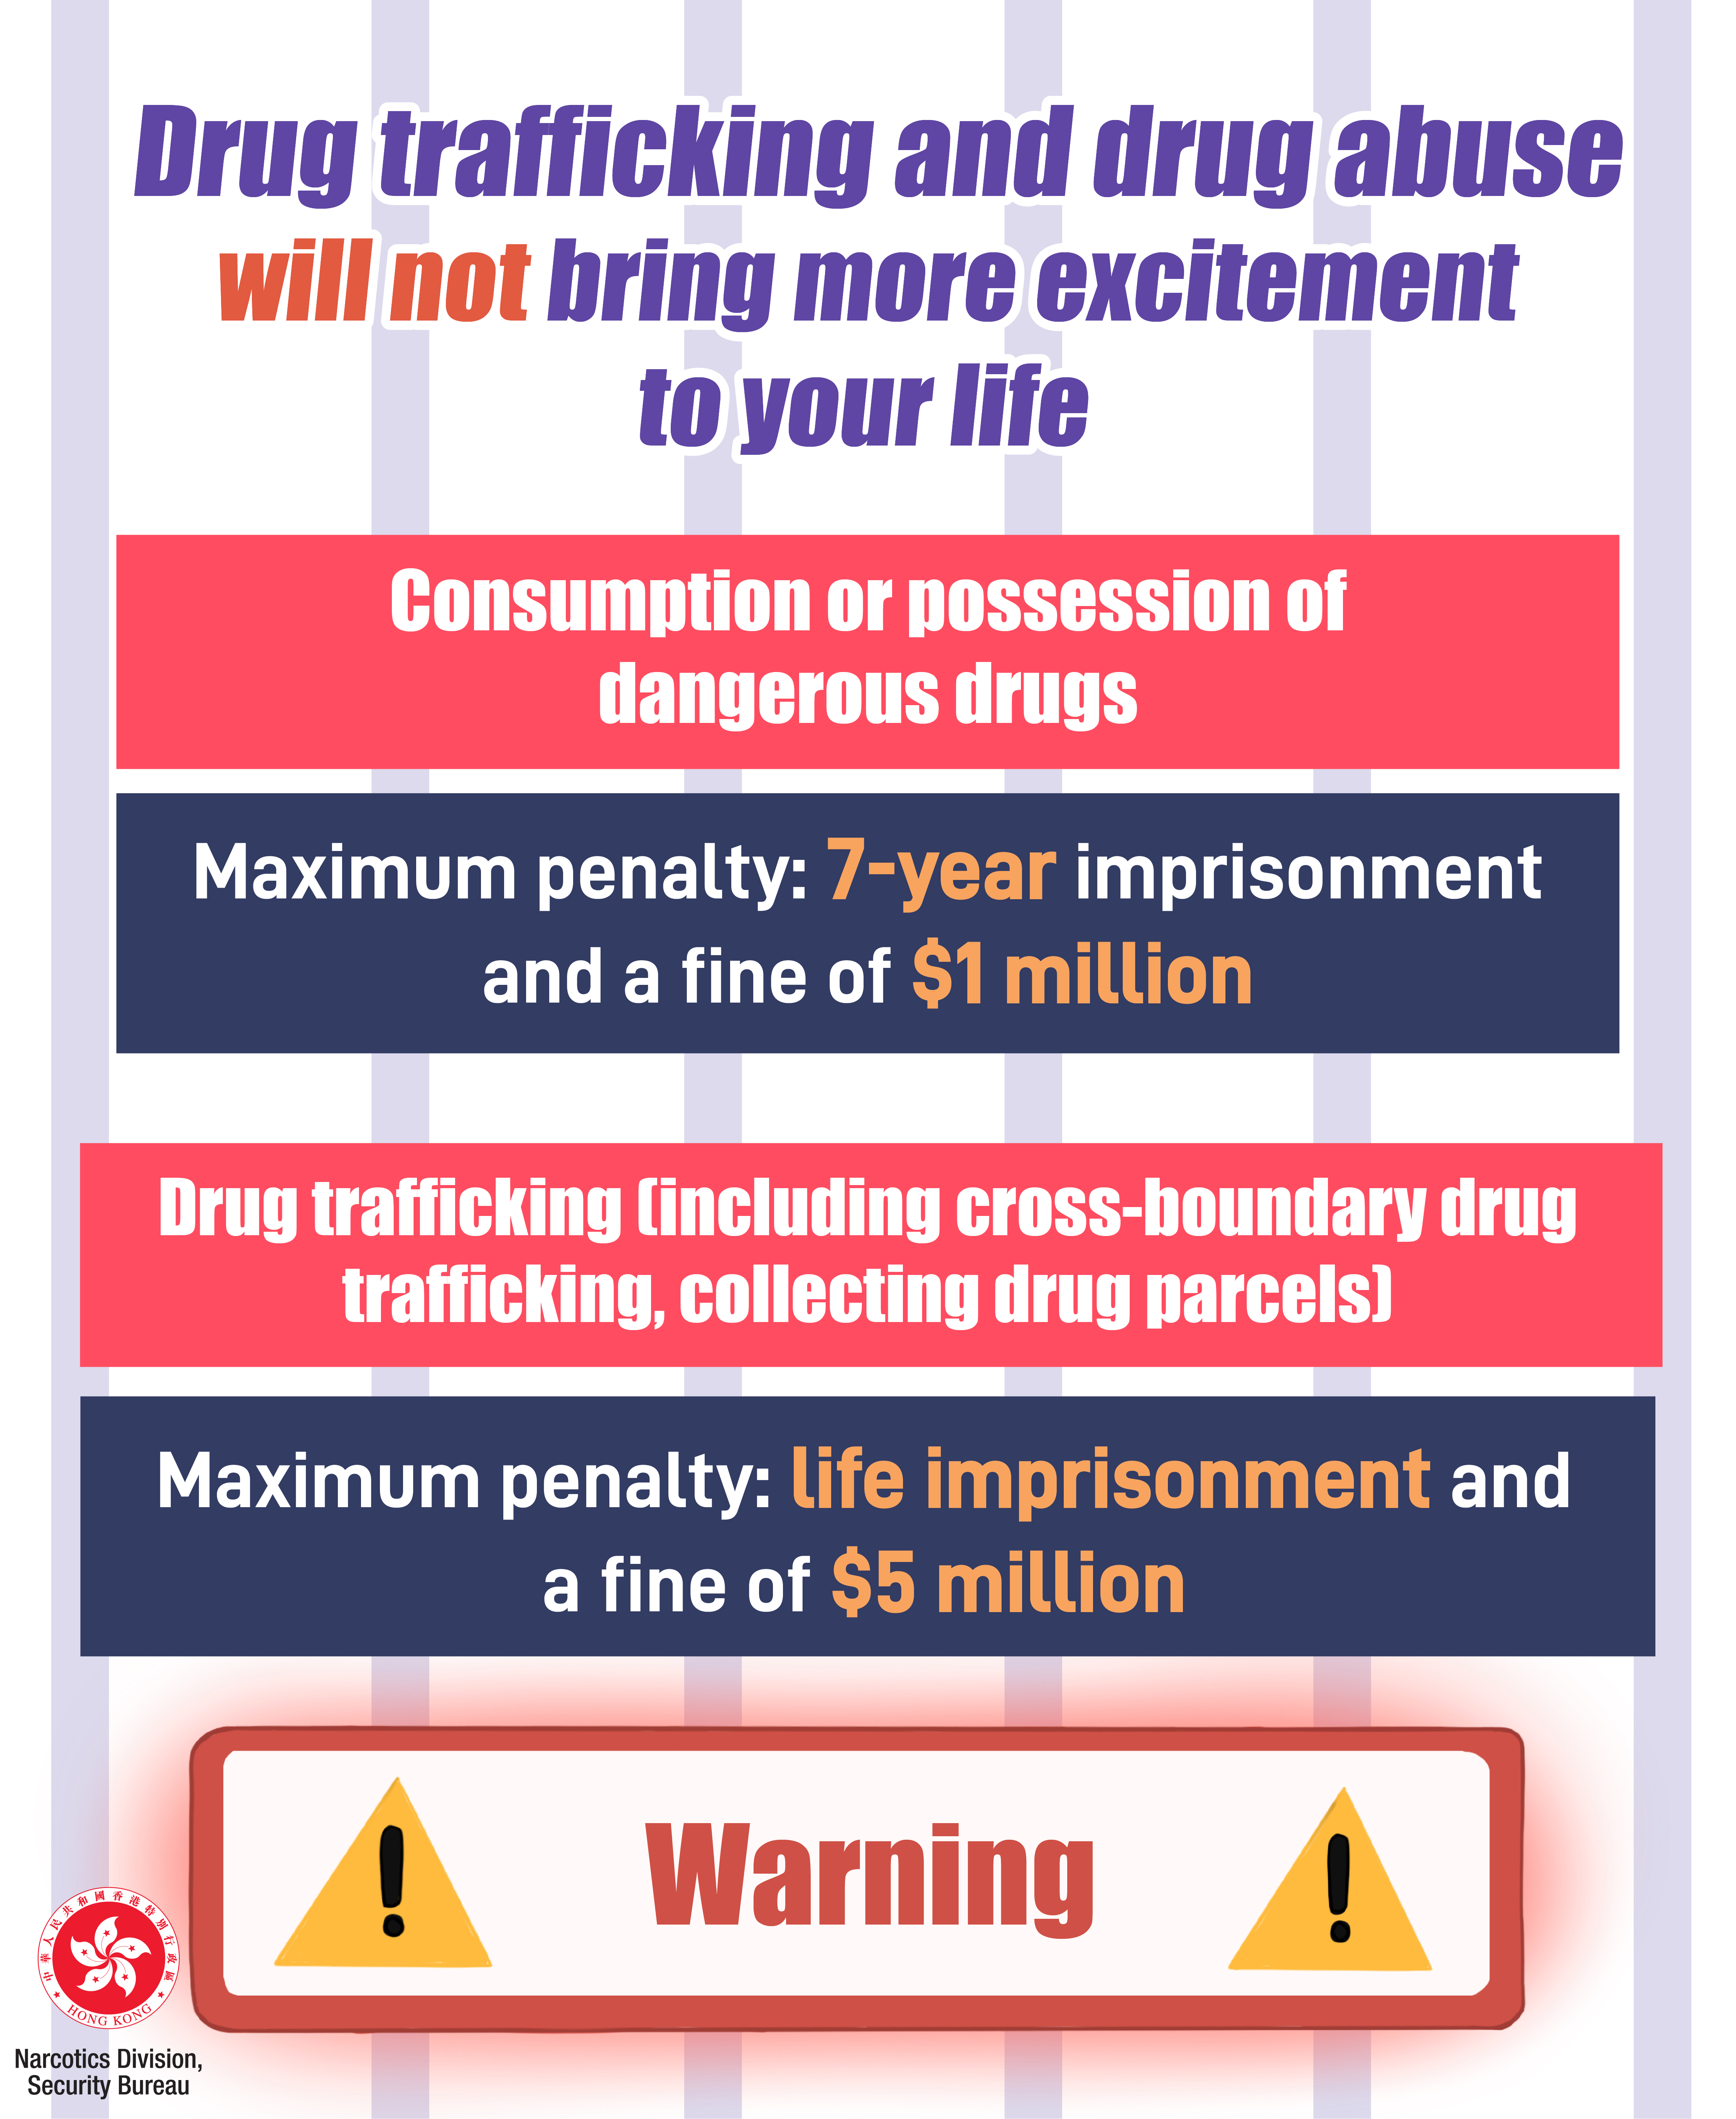 Drug trafficking and drug abuse will not bring more excitement to your life